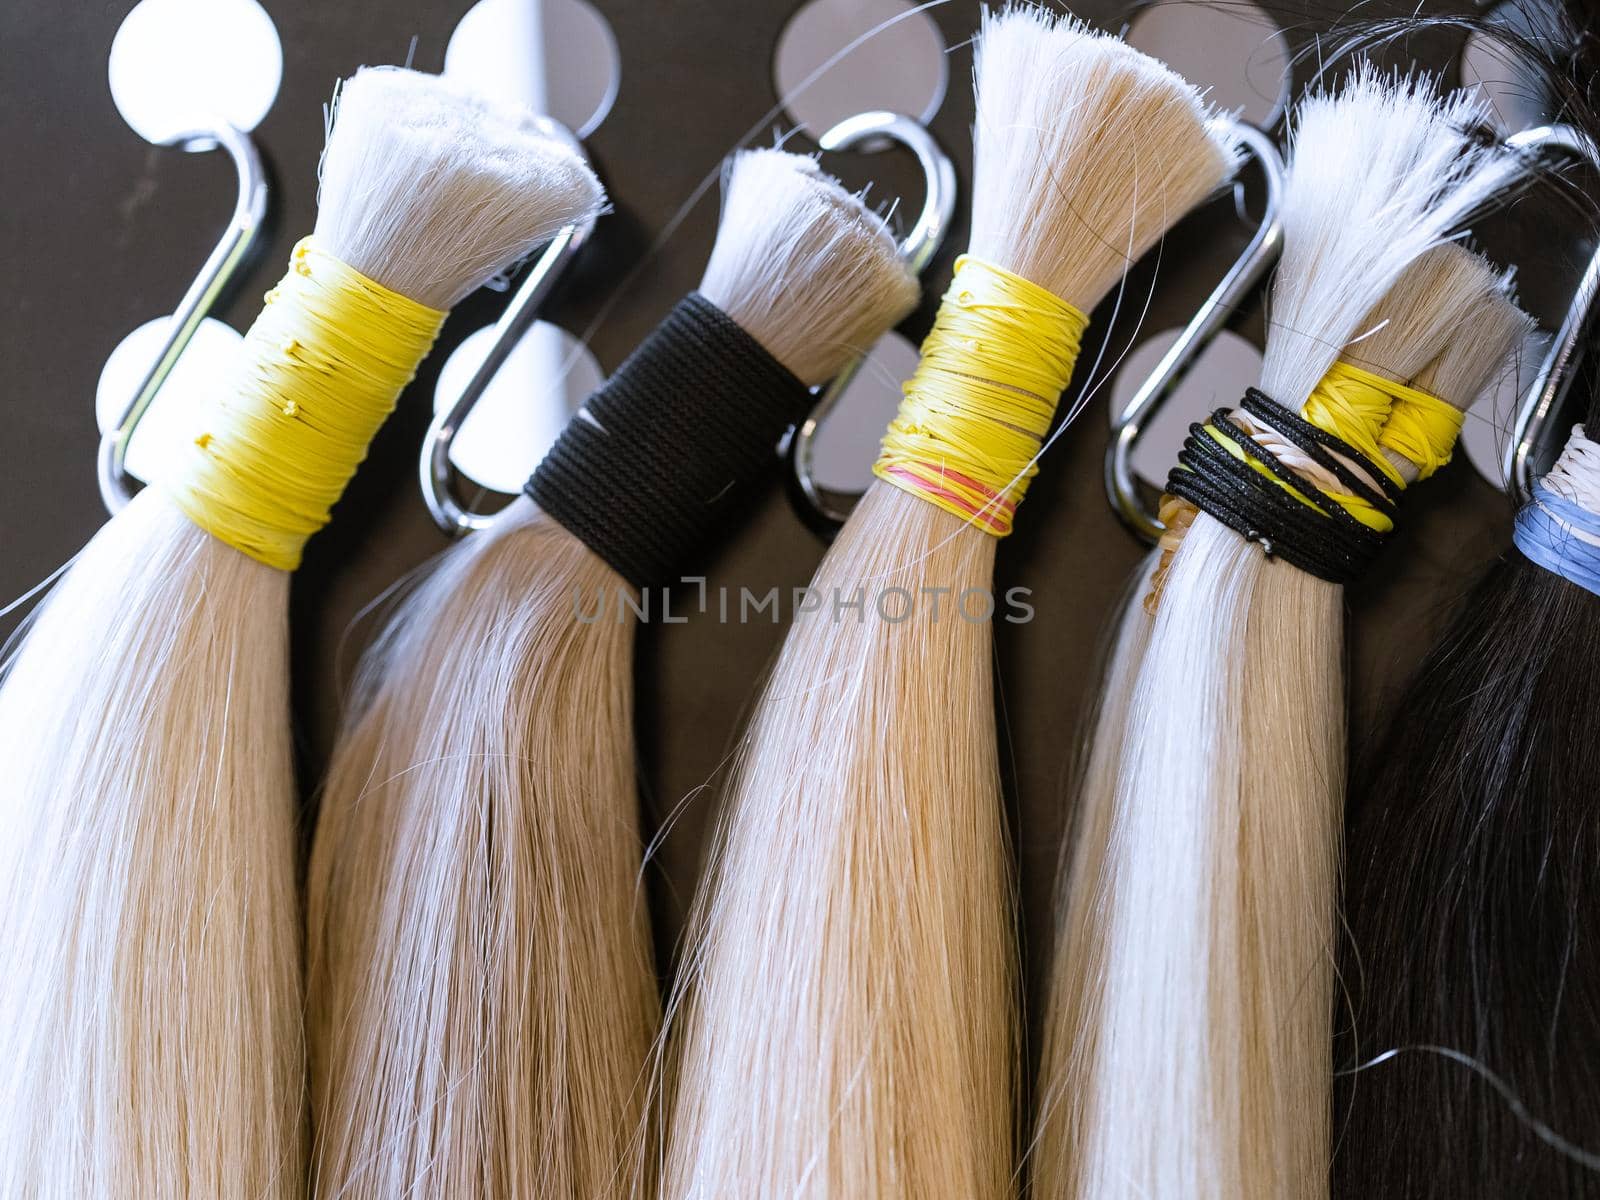 Samples of blonde natural remy human hair extensions